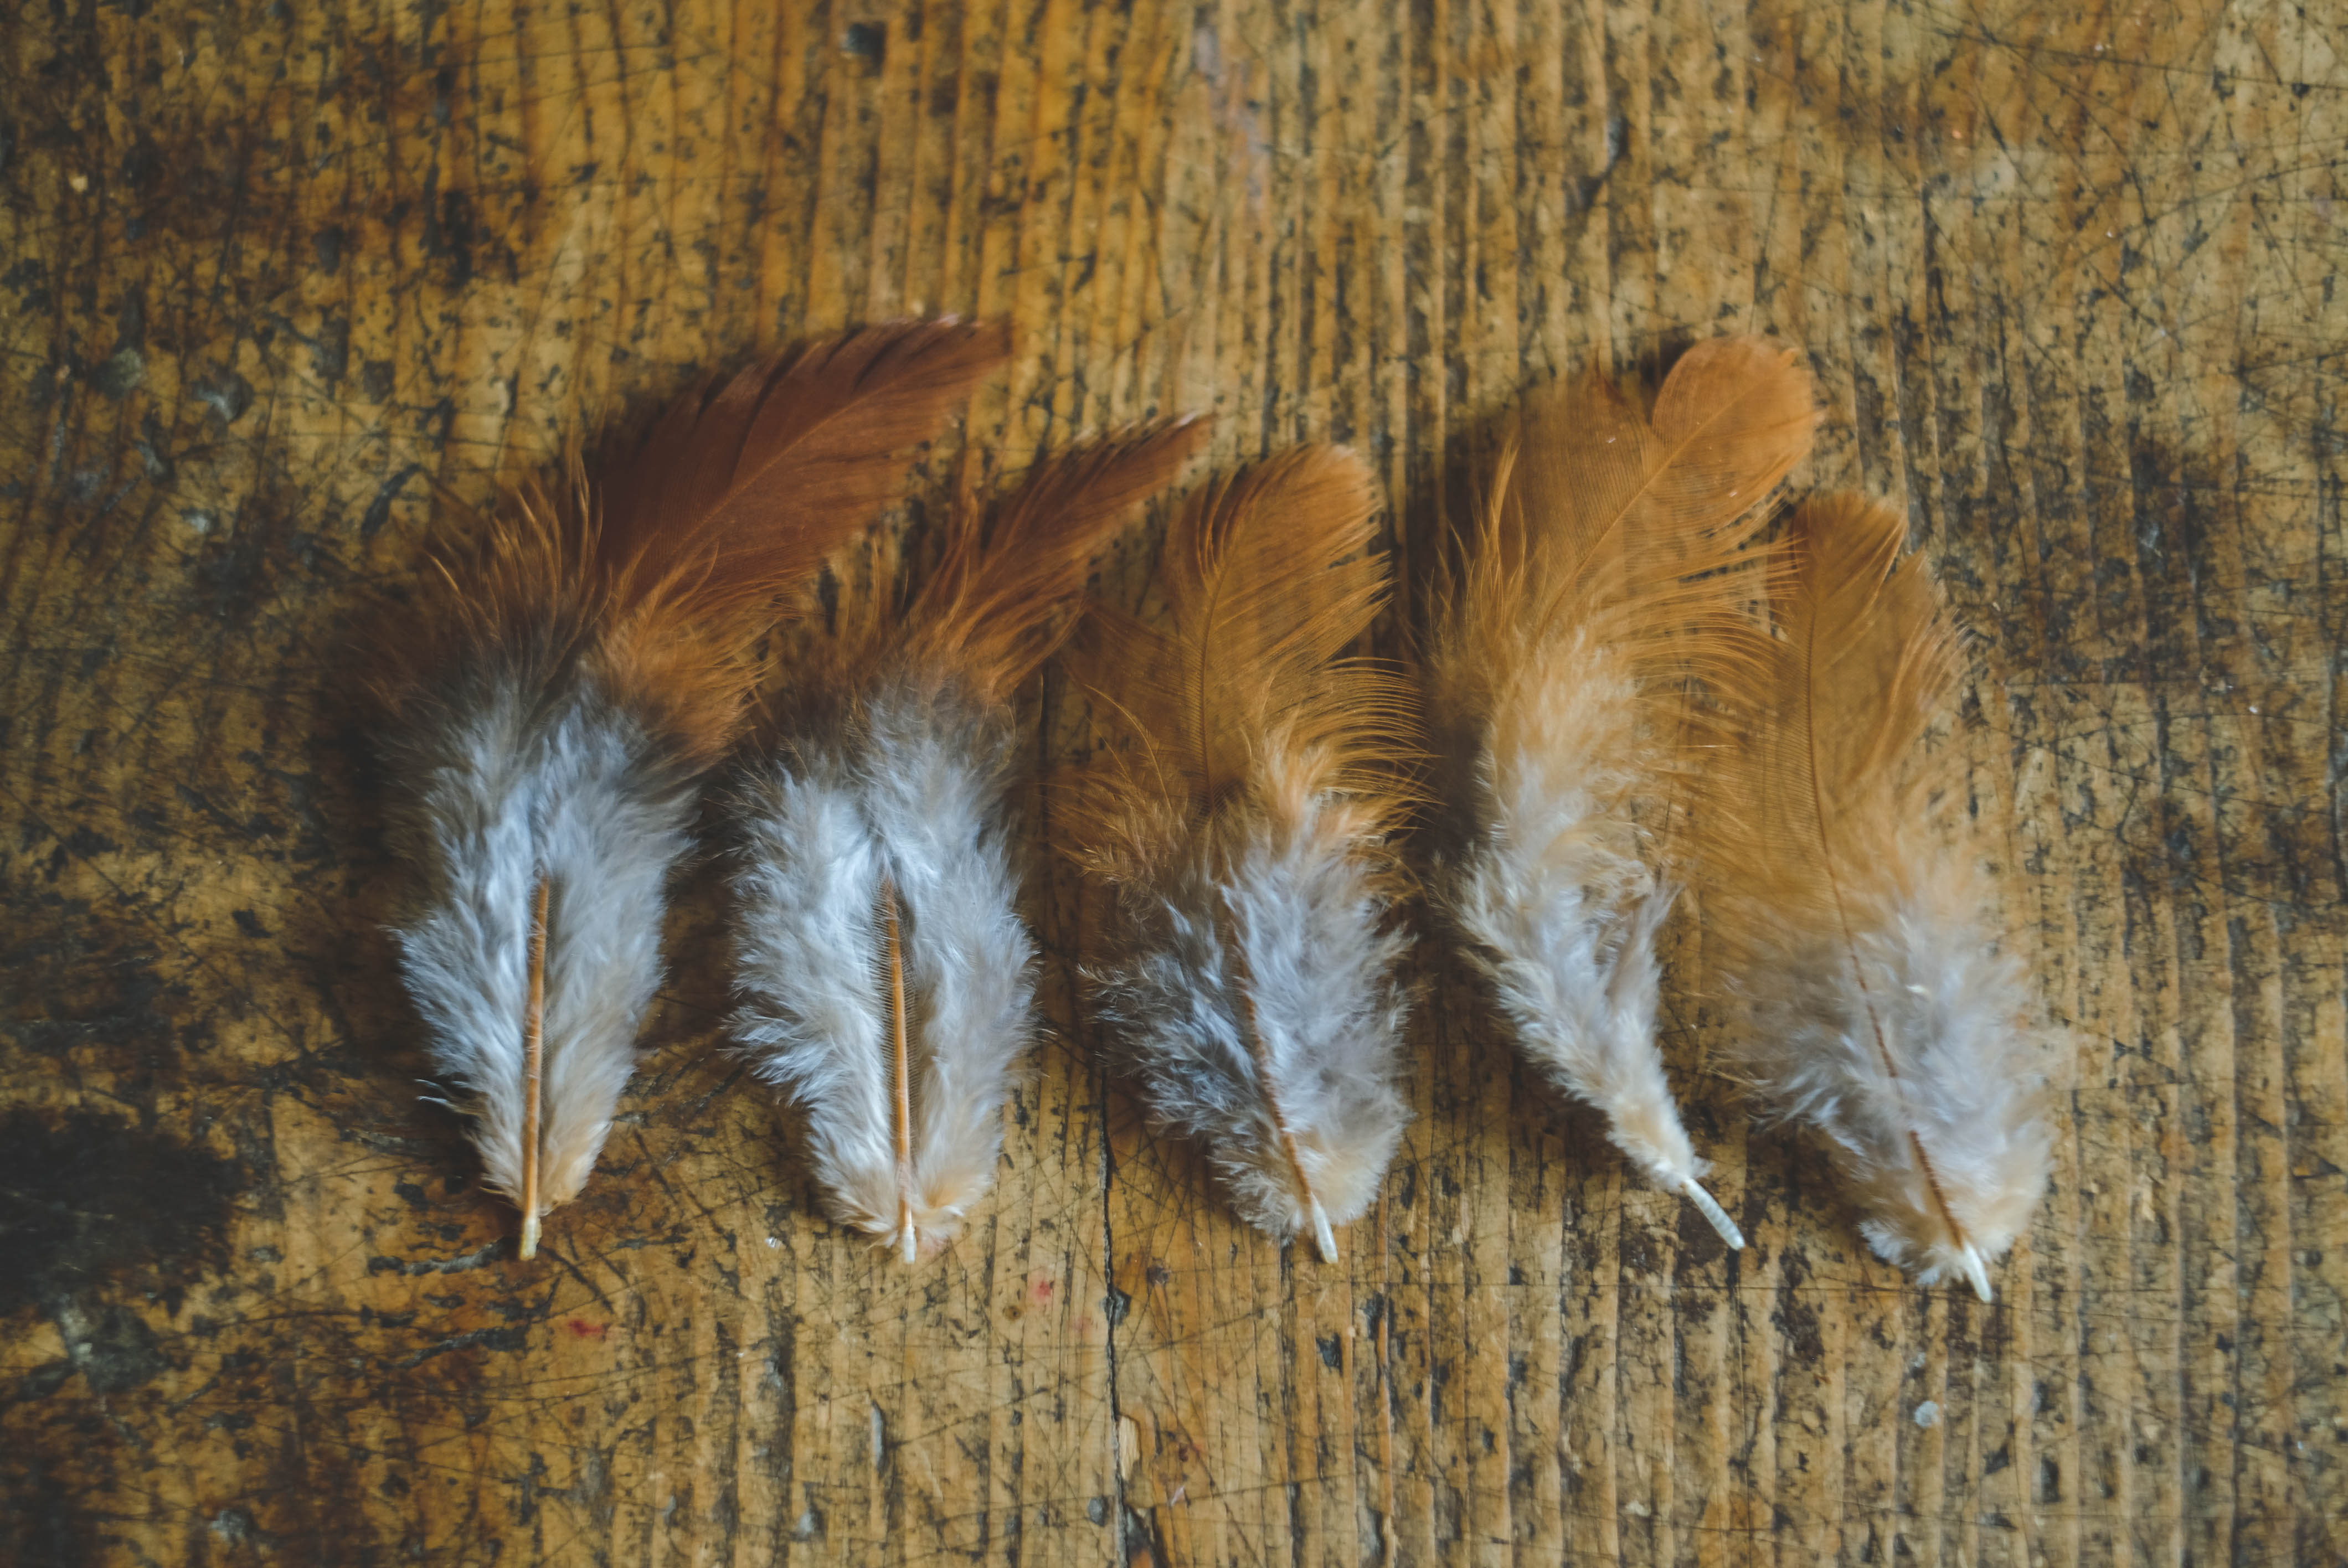 Free range lokal chicken feathers-small